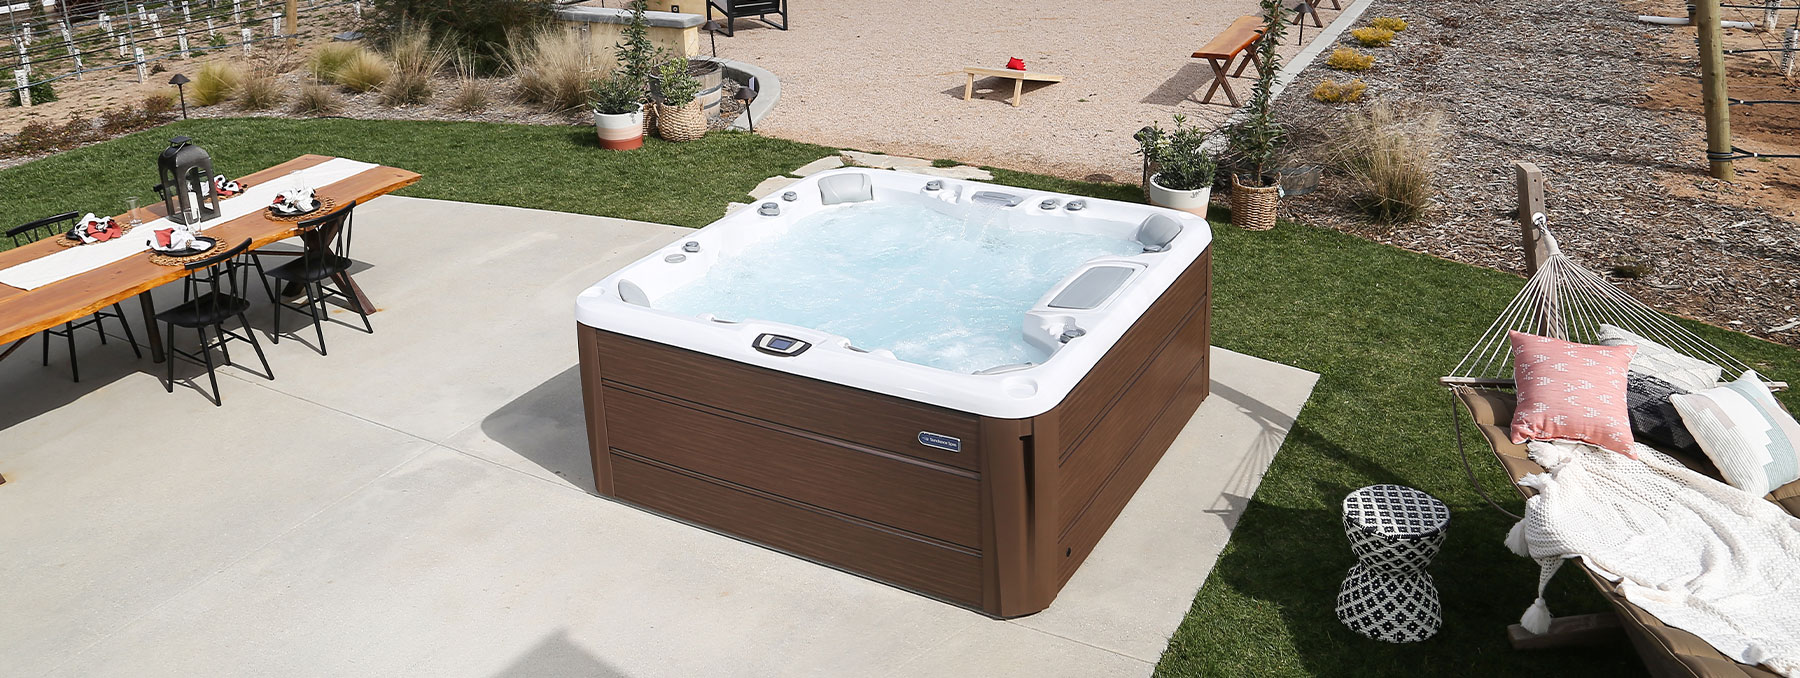 What if I don’t like the hot tub after buying it?